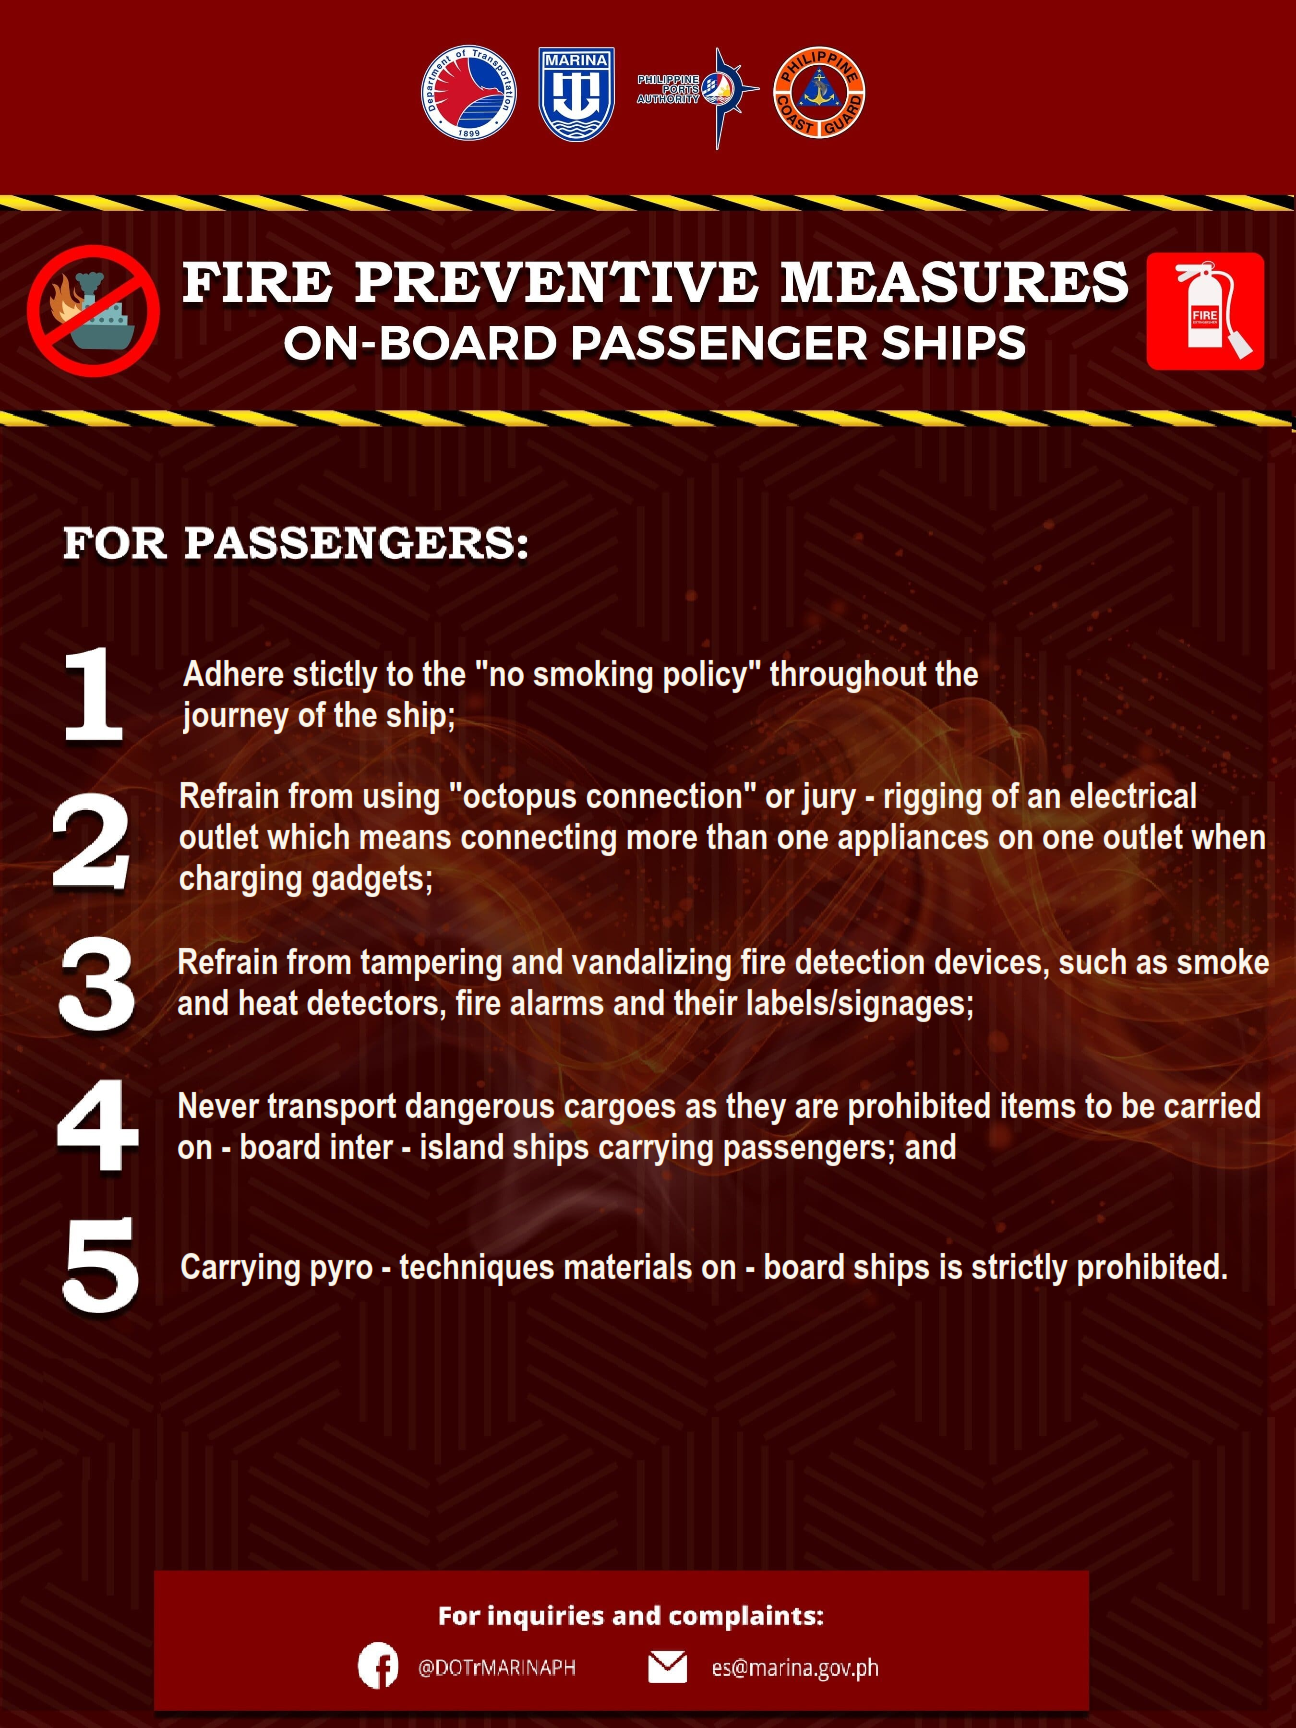 FOR PASSENGERS_Fire Preventive Measures poster_FINAL_10 MARCH 2023_001 (1)